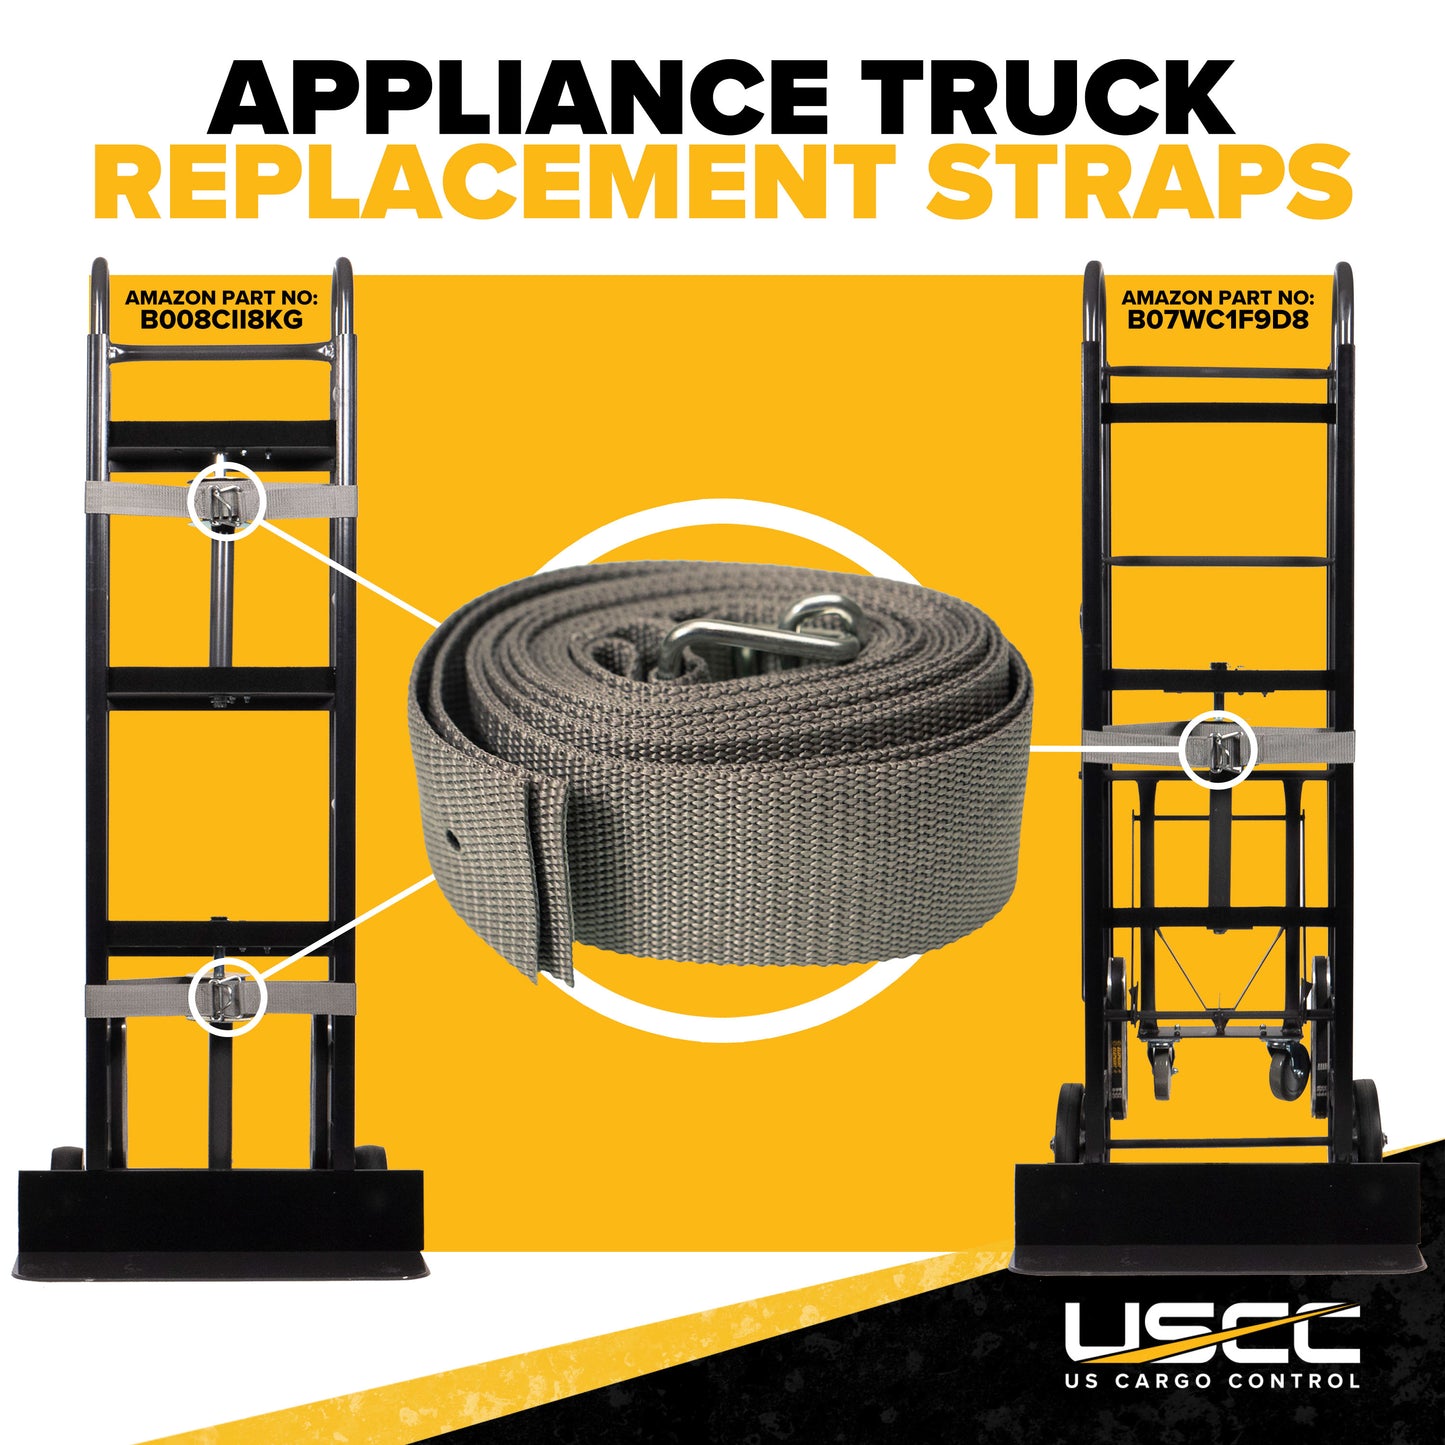 Appliance Truck Replacement Strap